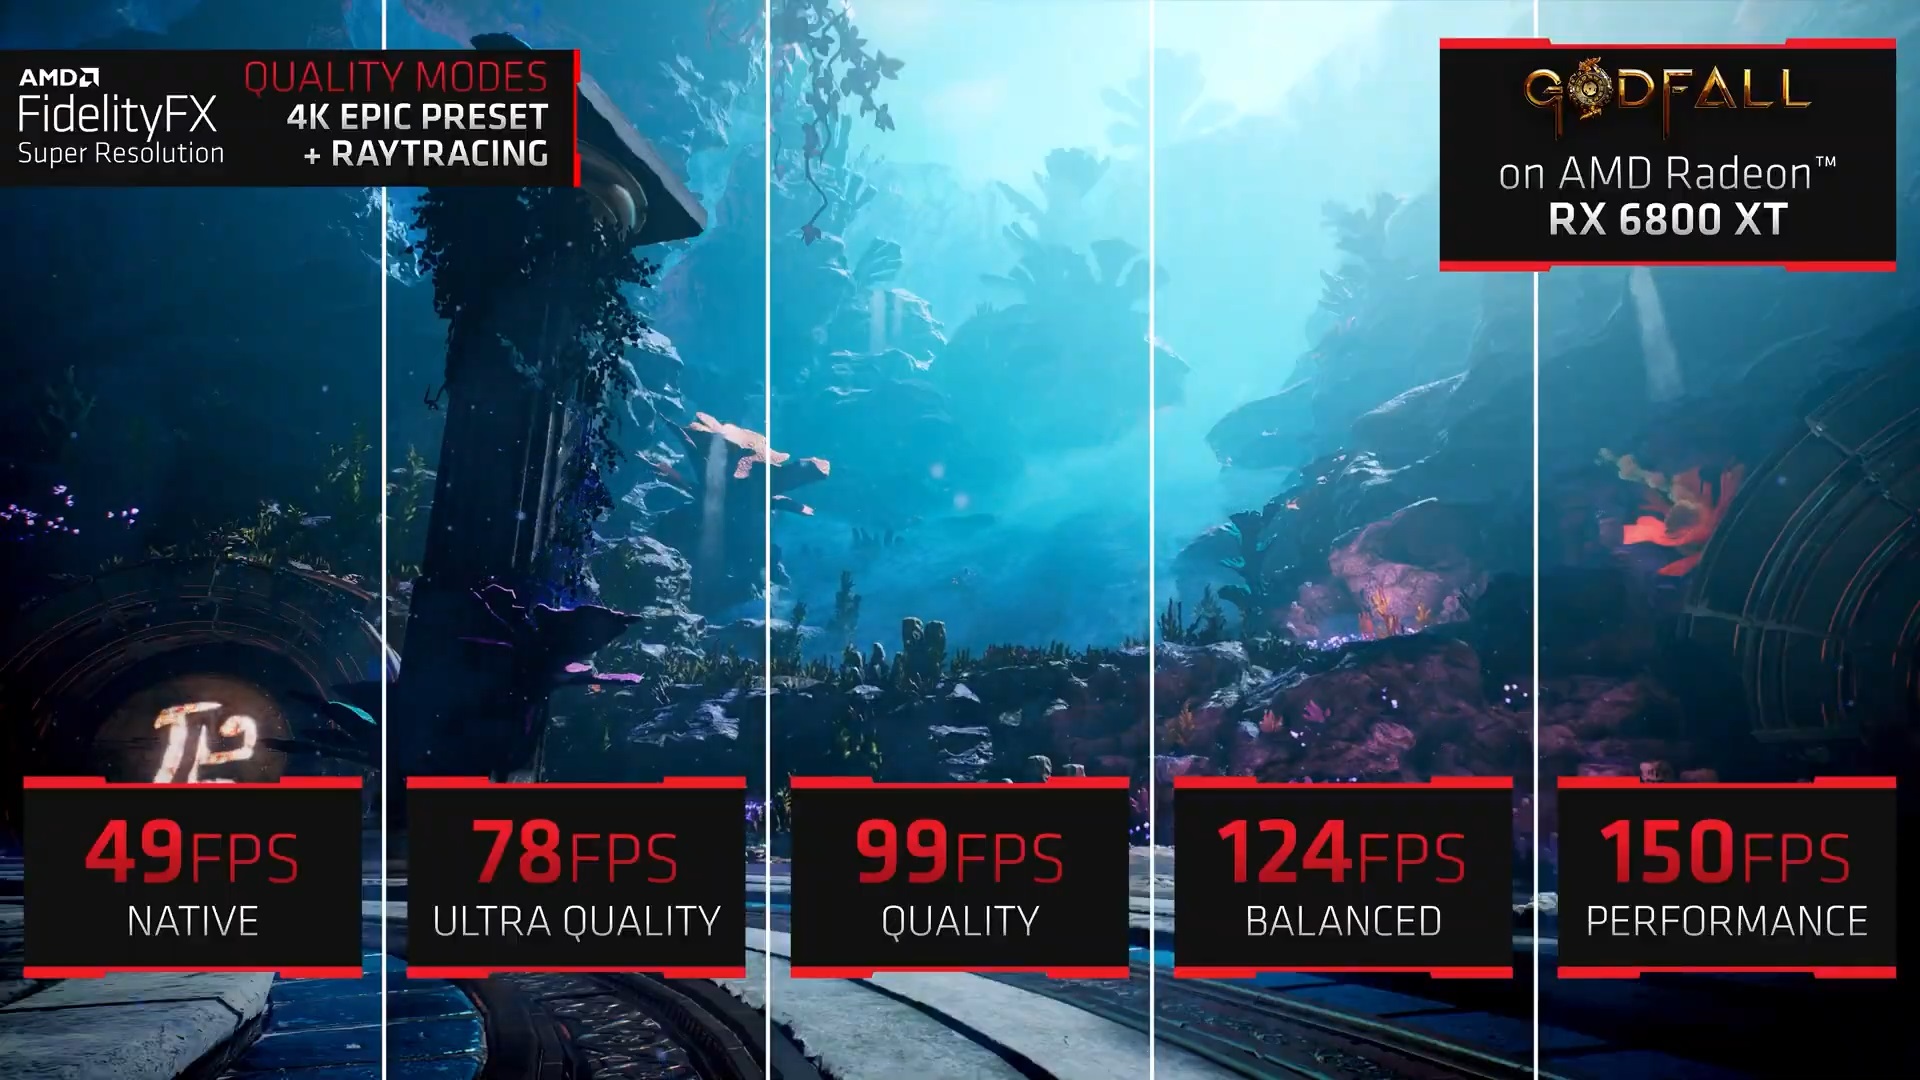 Performance Scaling - Make your games run smoothly on high-end, mid-range,  and low-end devices